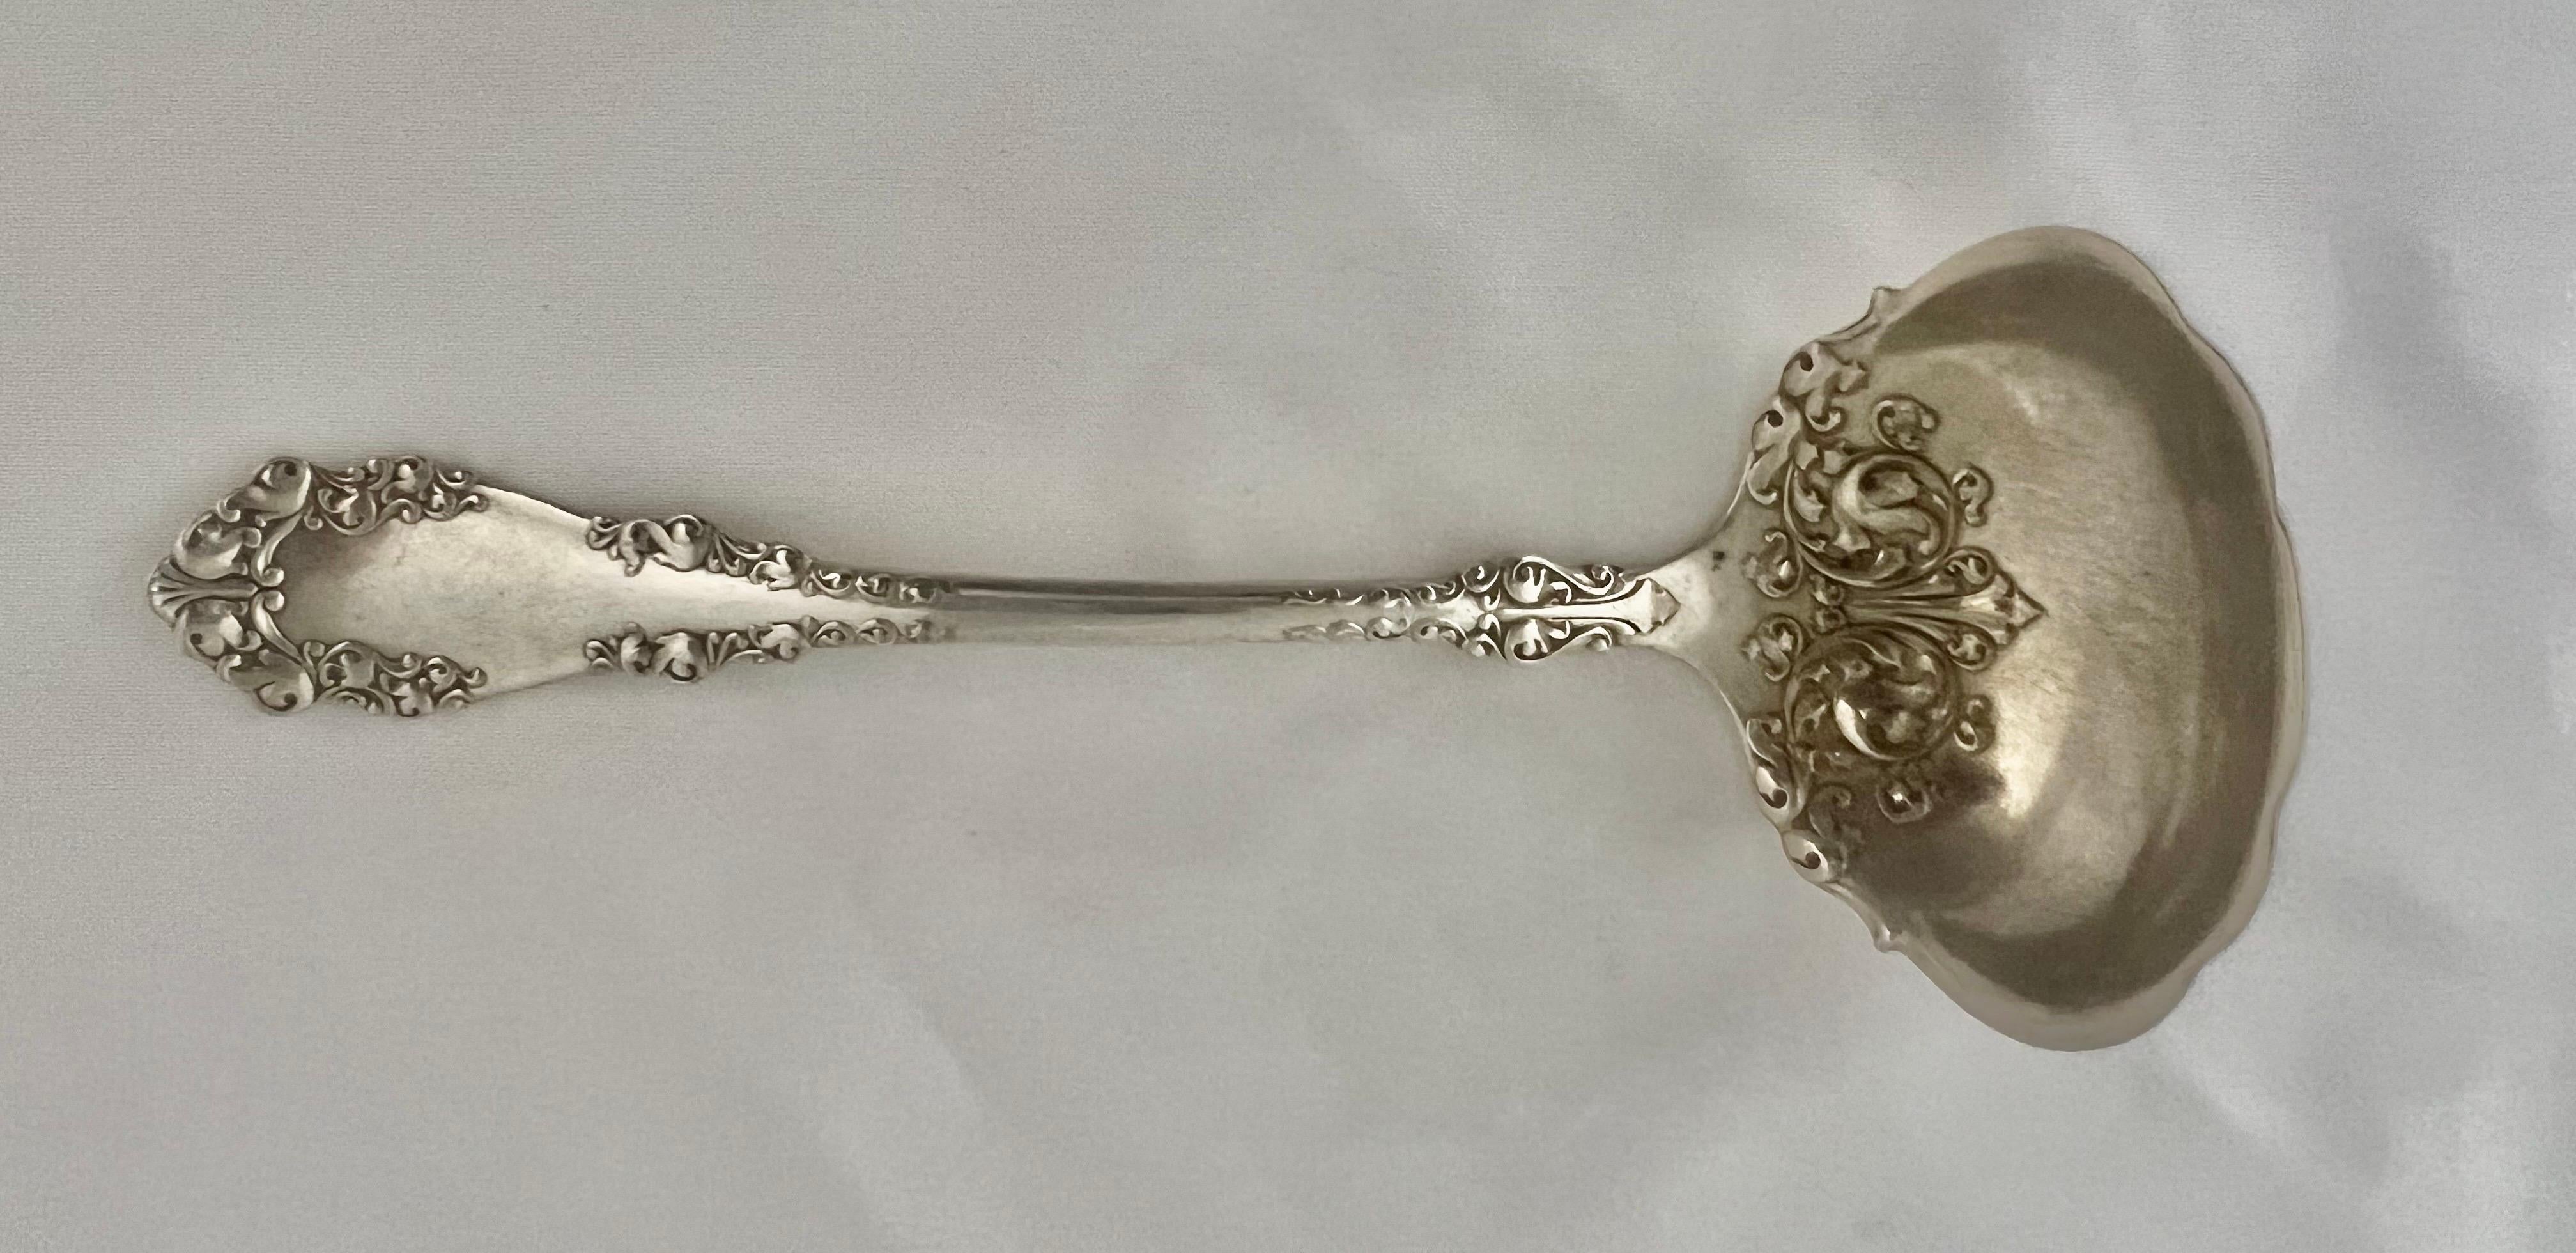 Metalwork 1847 Rogers Bros. Silver Serving Spoon For Sale